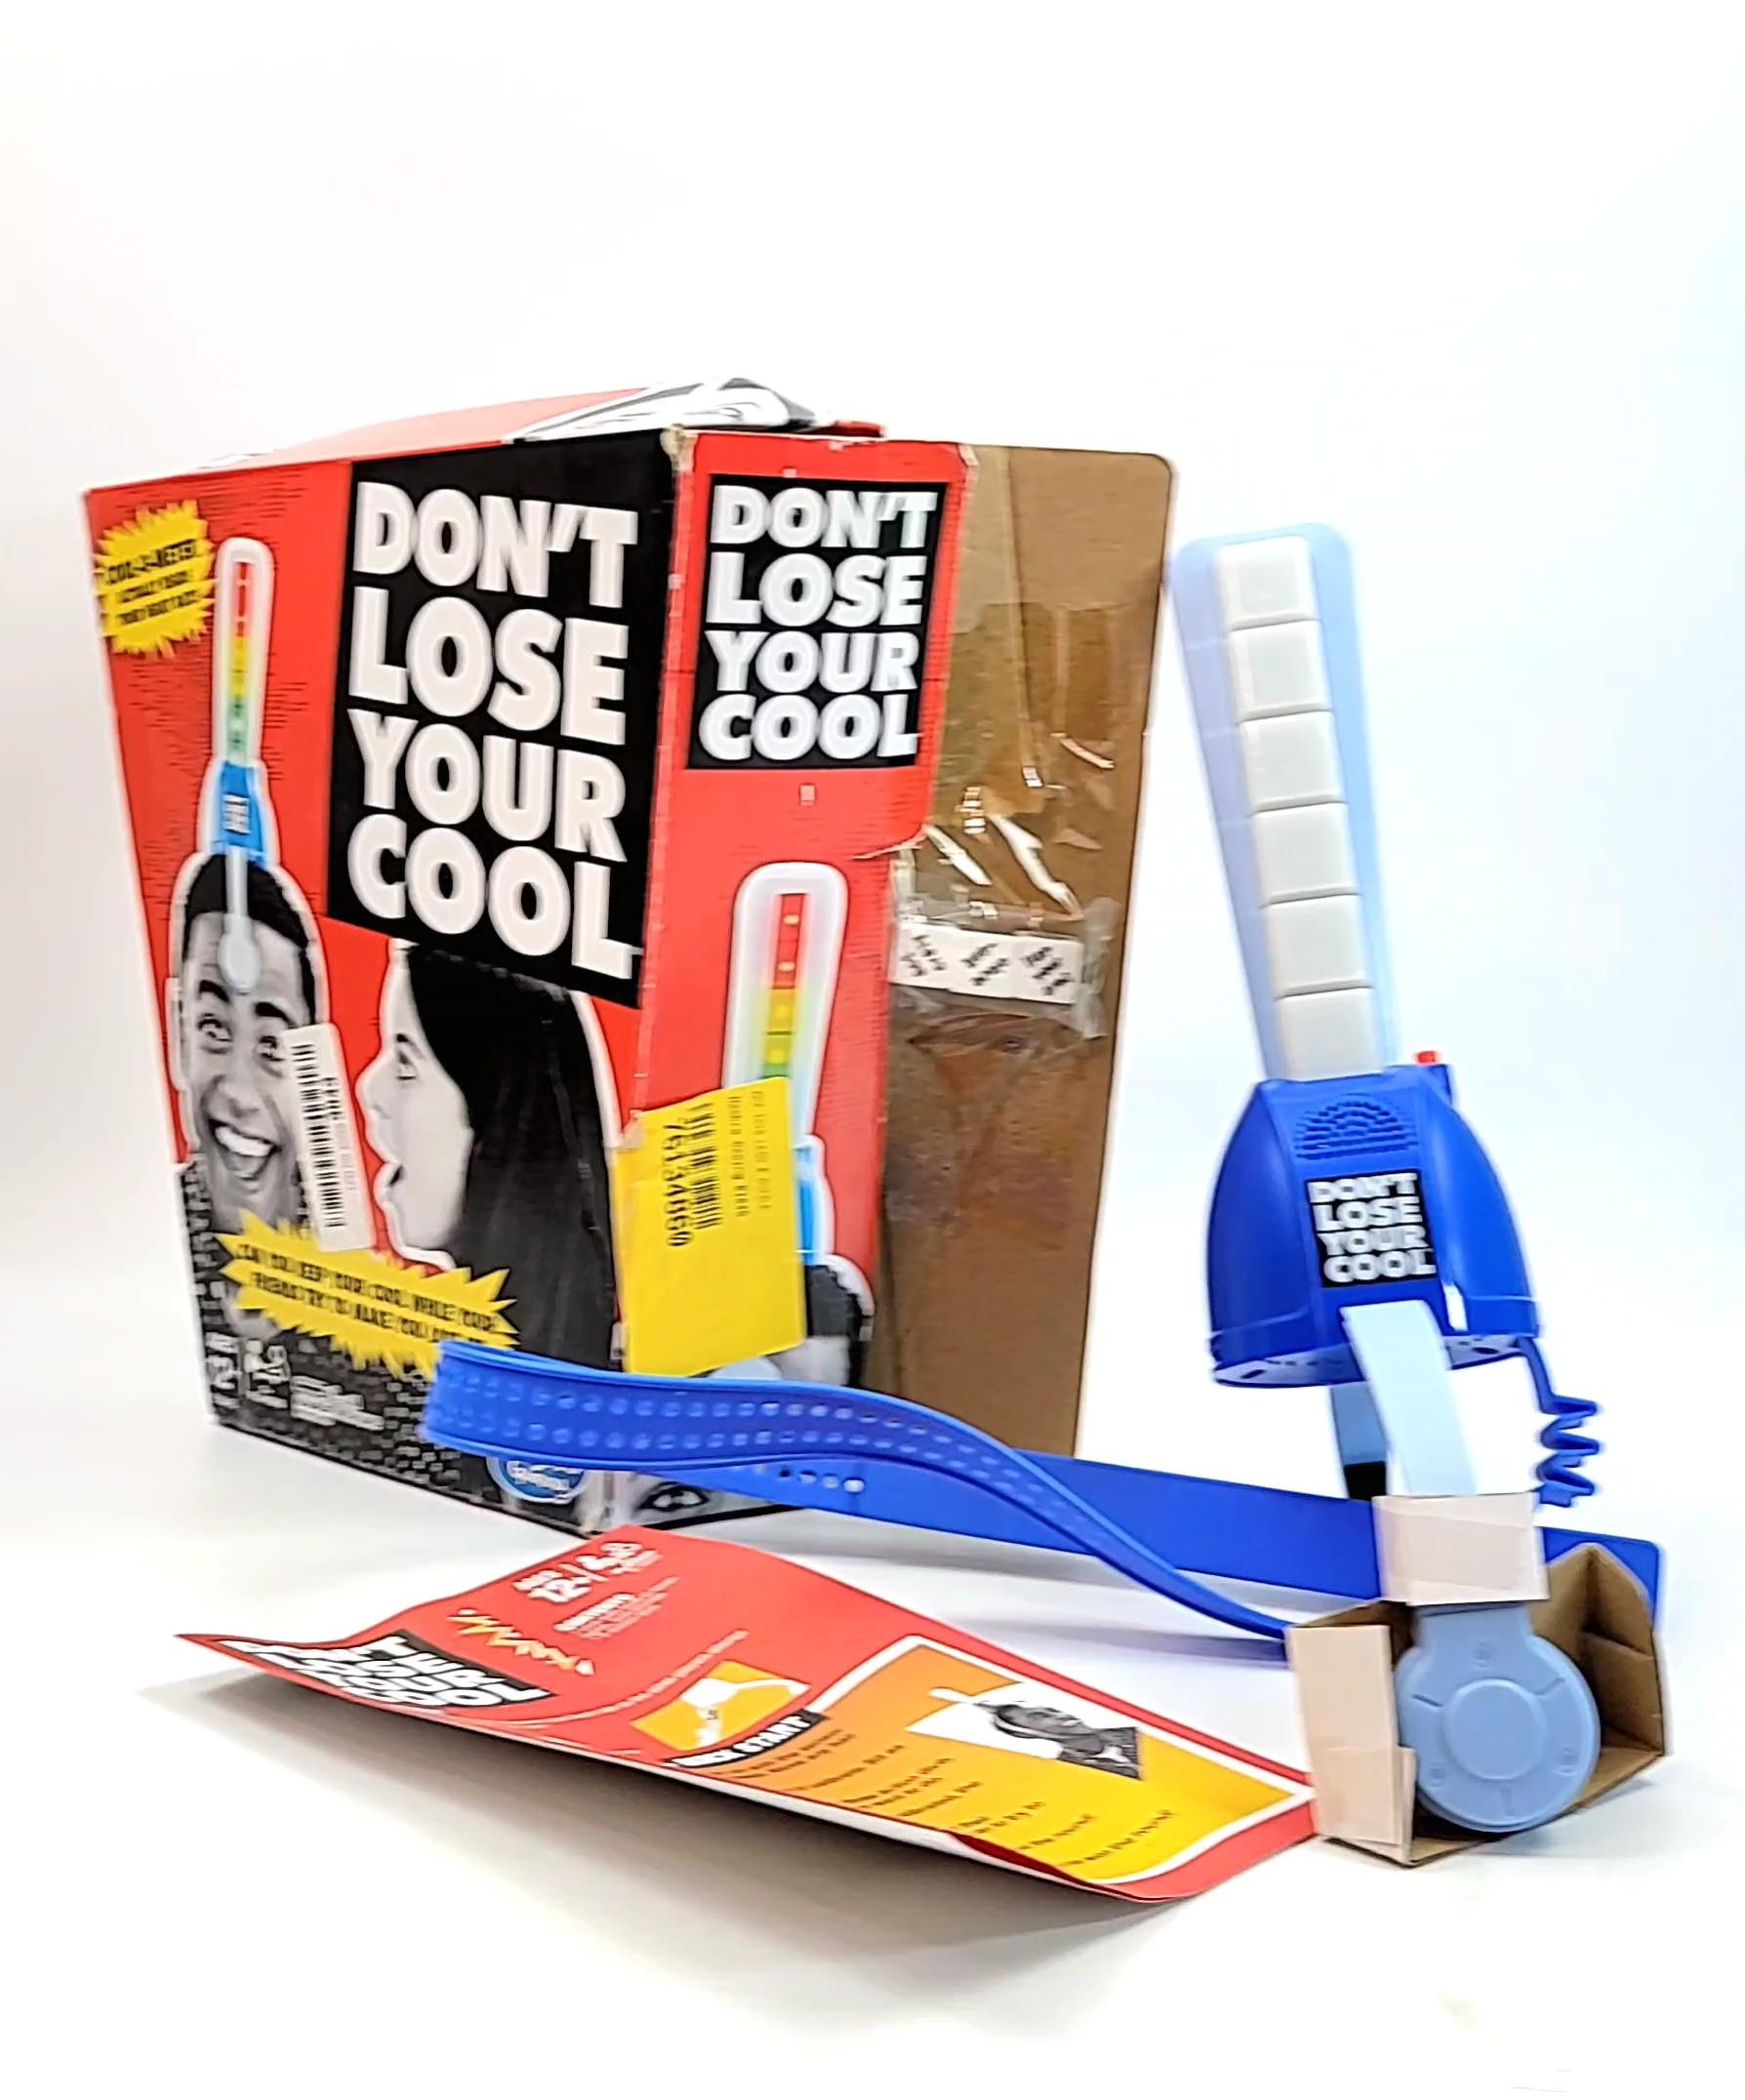 Don't Lose Your Cool Game Electronic Kids Party Game